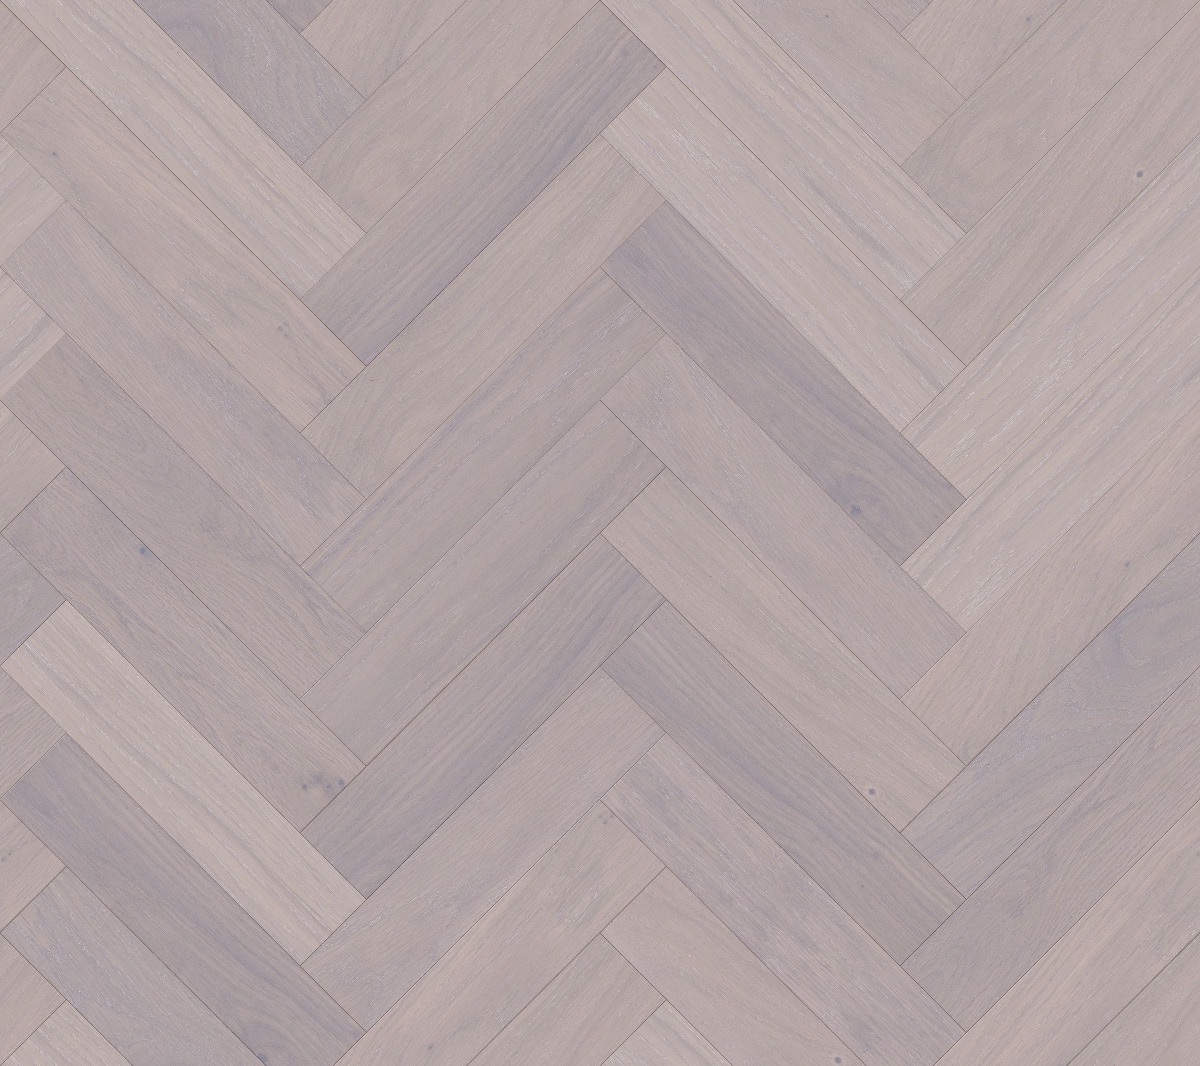 A seamless wood texture with expressive exp55-202 boards arranged in a Herringbone pattern